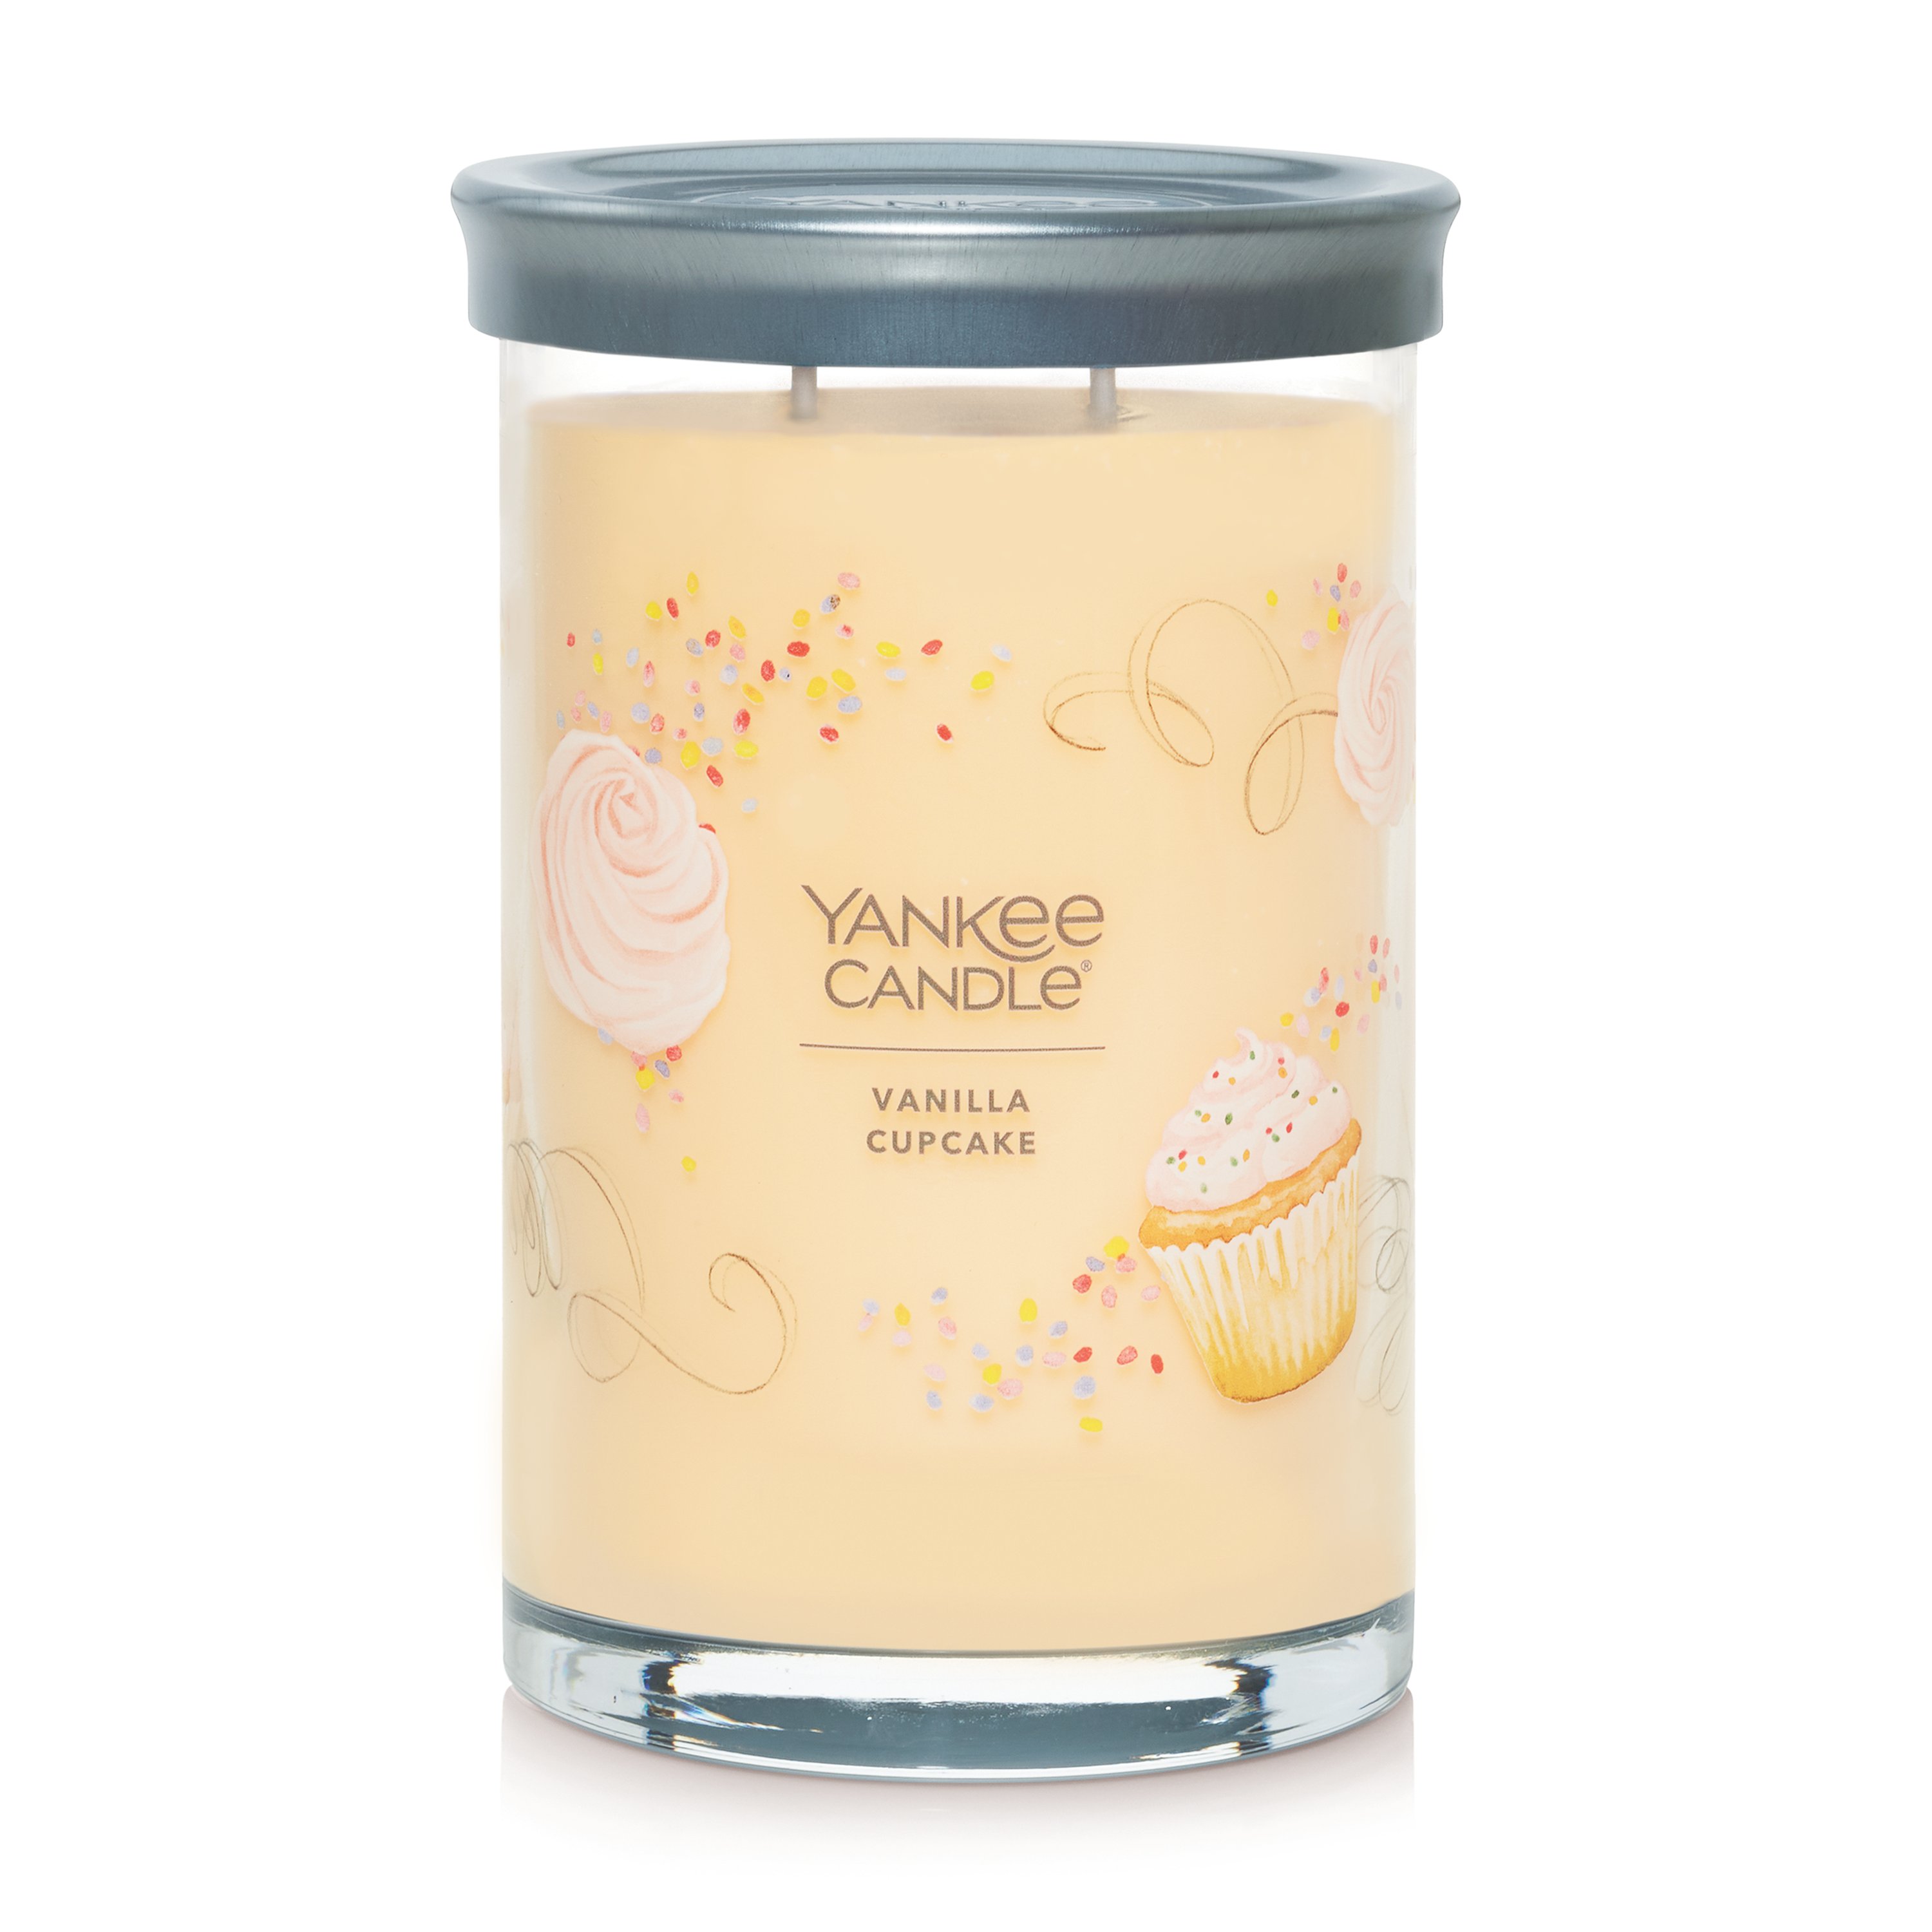 Yankee Candle Signature Collection Candle, Vanilla Cupcake